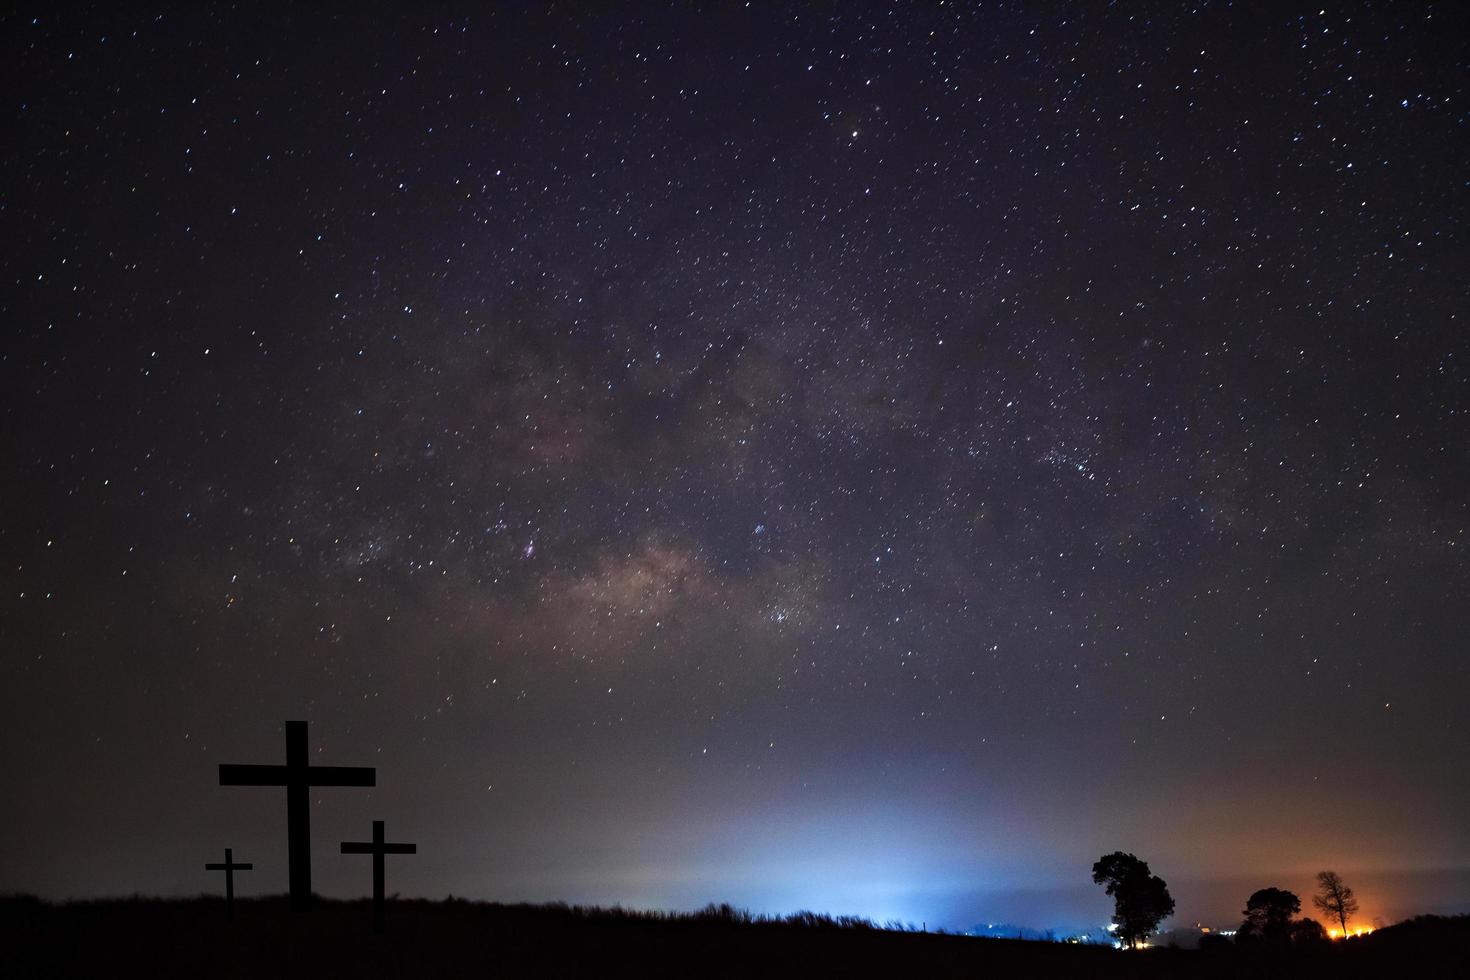 Silhouette of cross over milky way photo